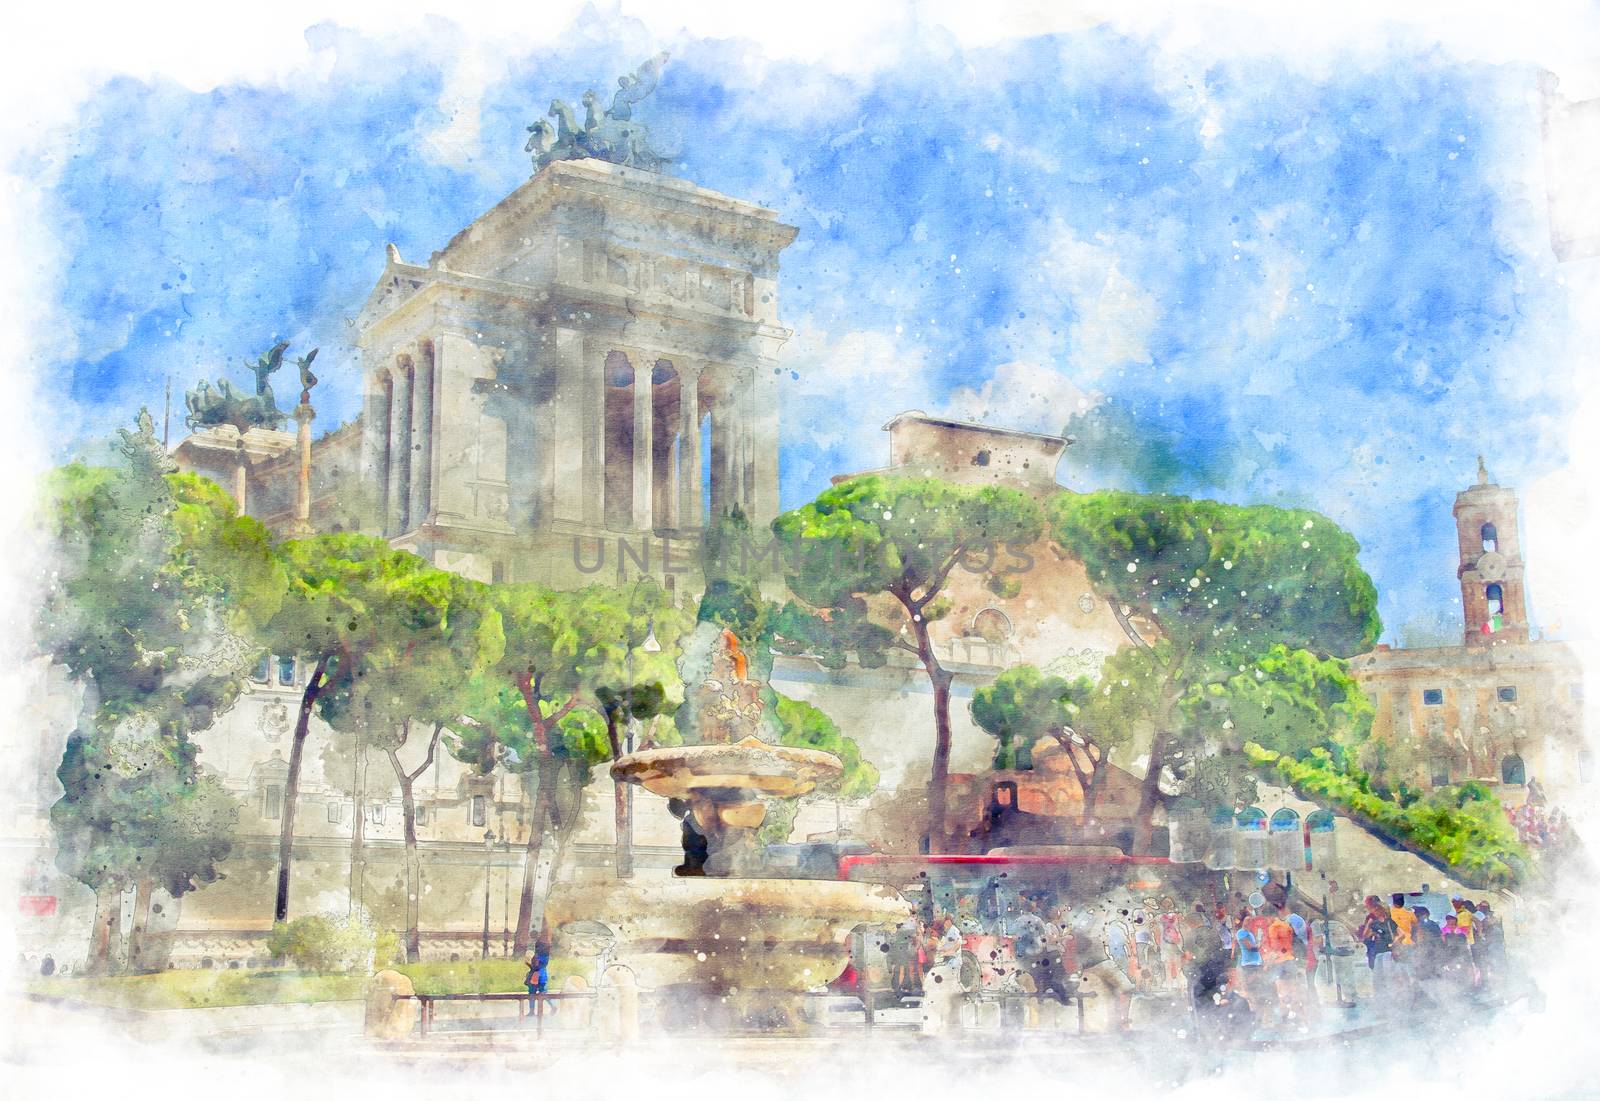 Digital illustration in watercolor style of Piazza d'Aracoeli, view on Altar of the Fatherland, Rome, Italy